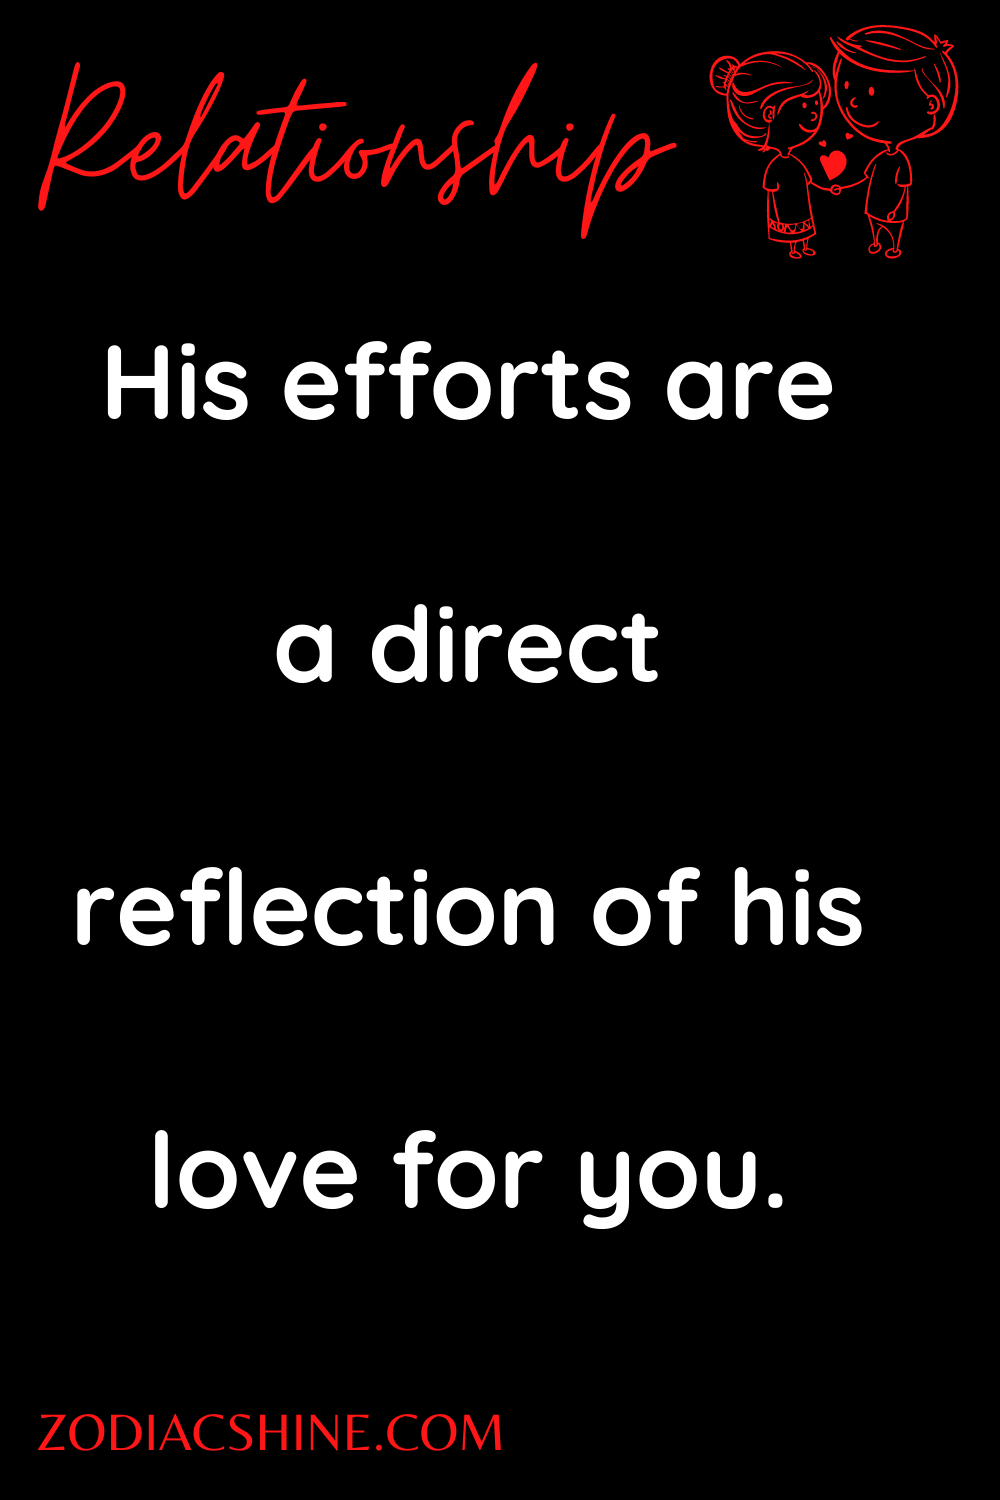 His efforts are a direct reflection of his love for you.